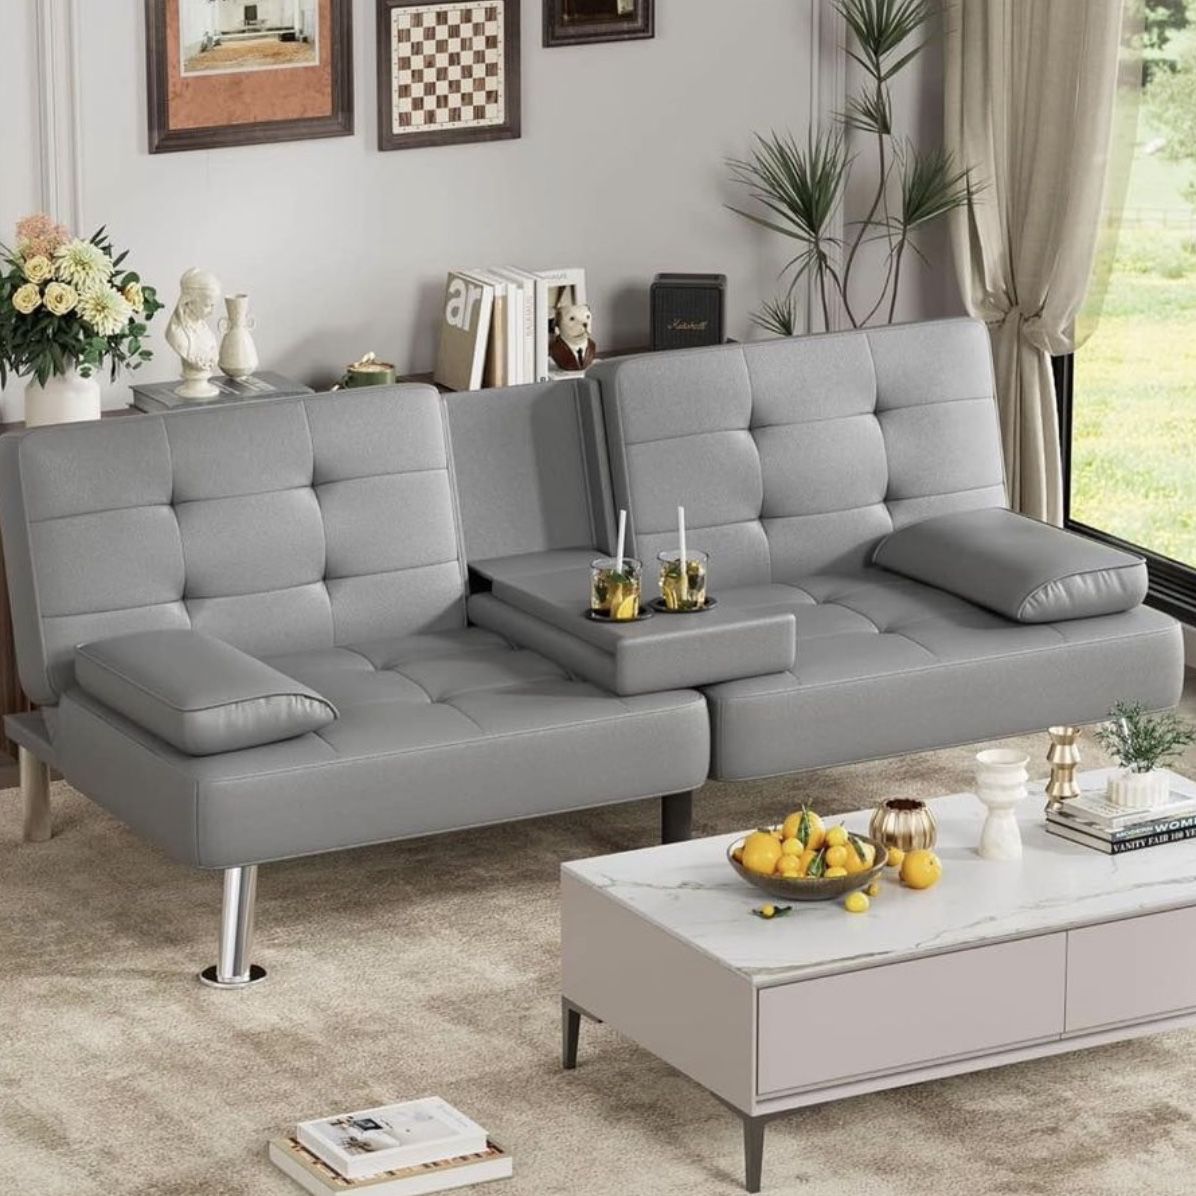 Grey color Faux Leather Upholstered Convertible Folding Futon Sofa Bed 2 Cupholders